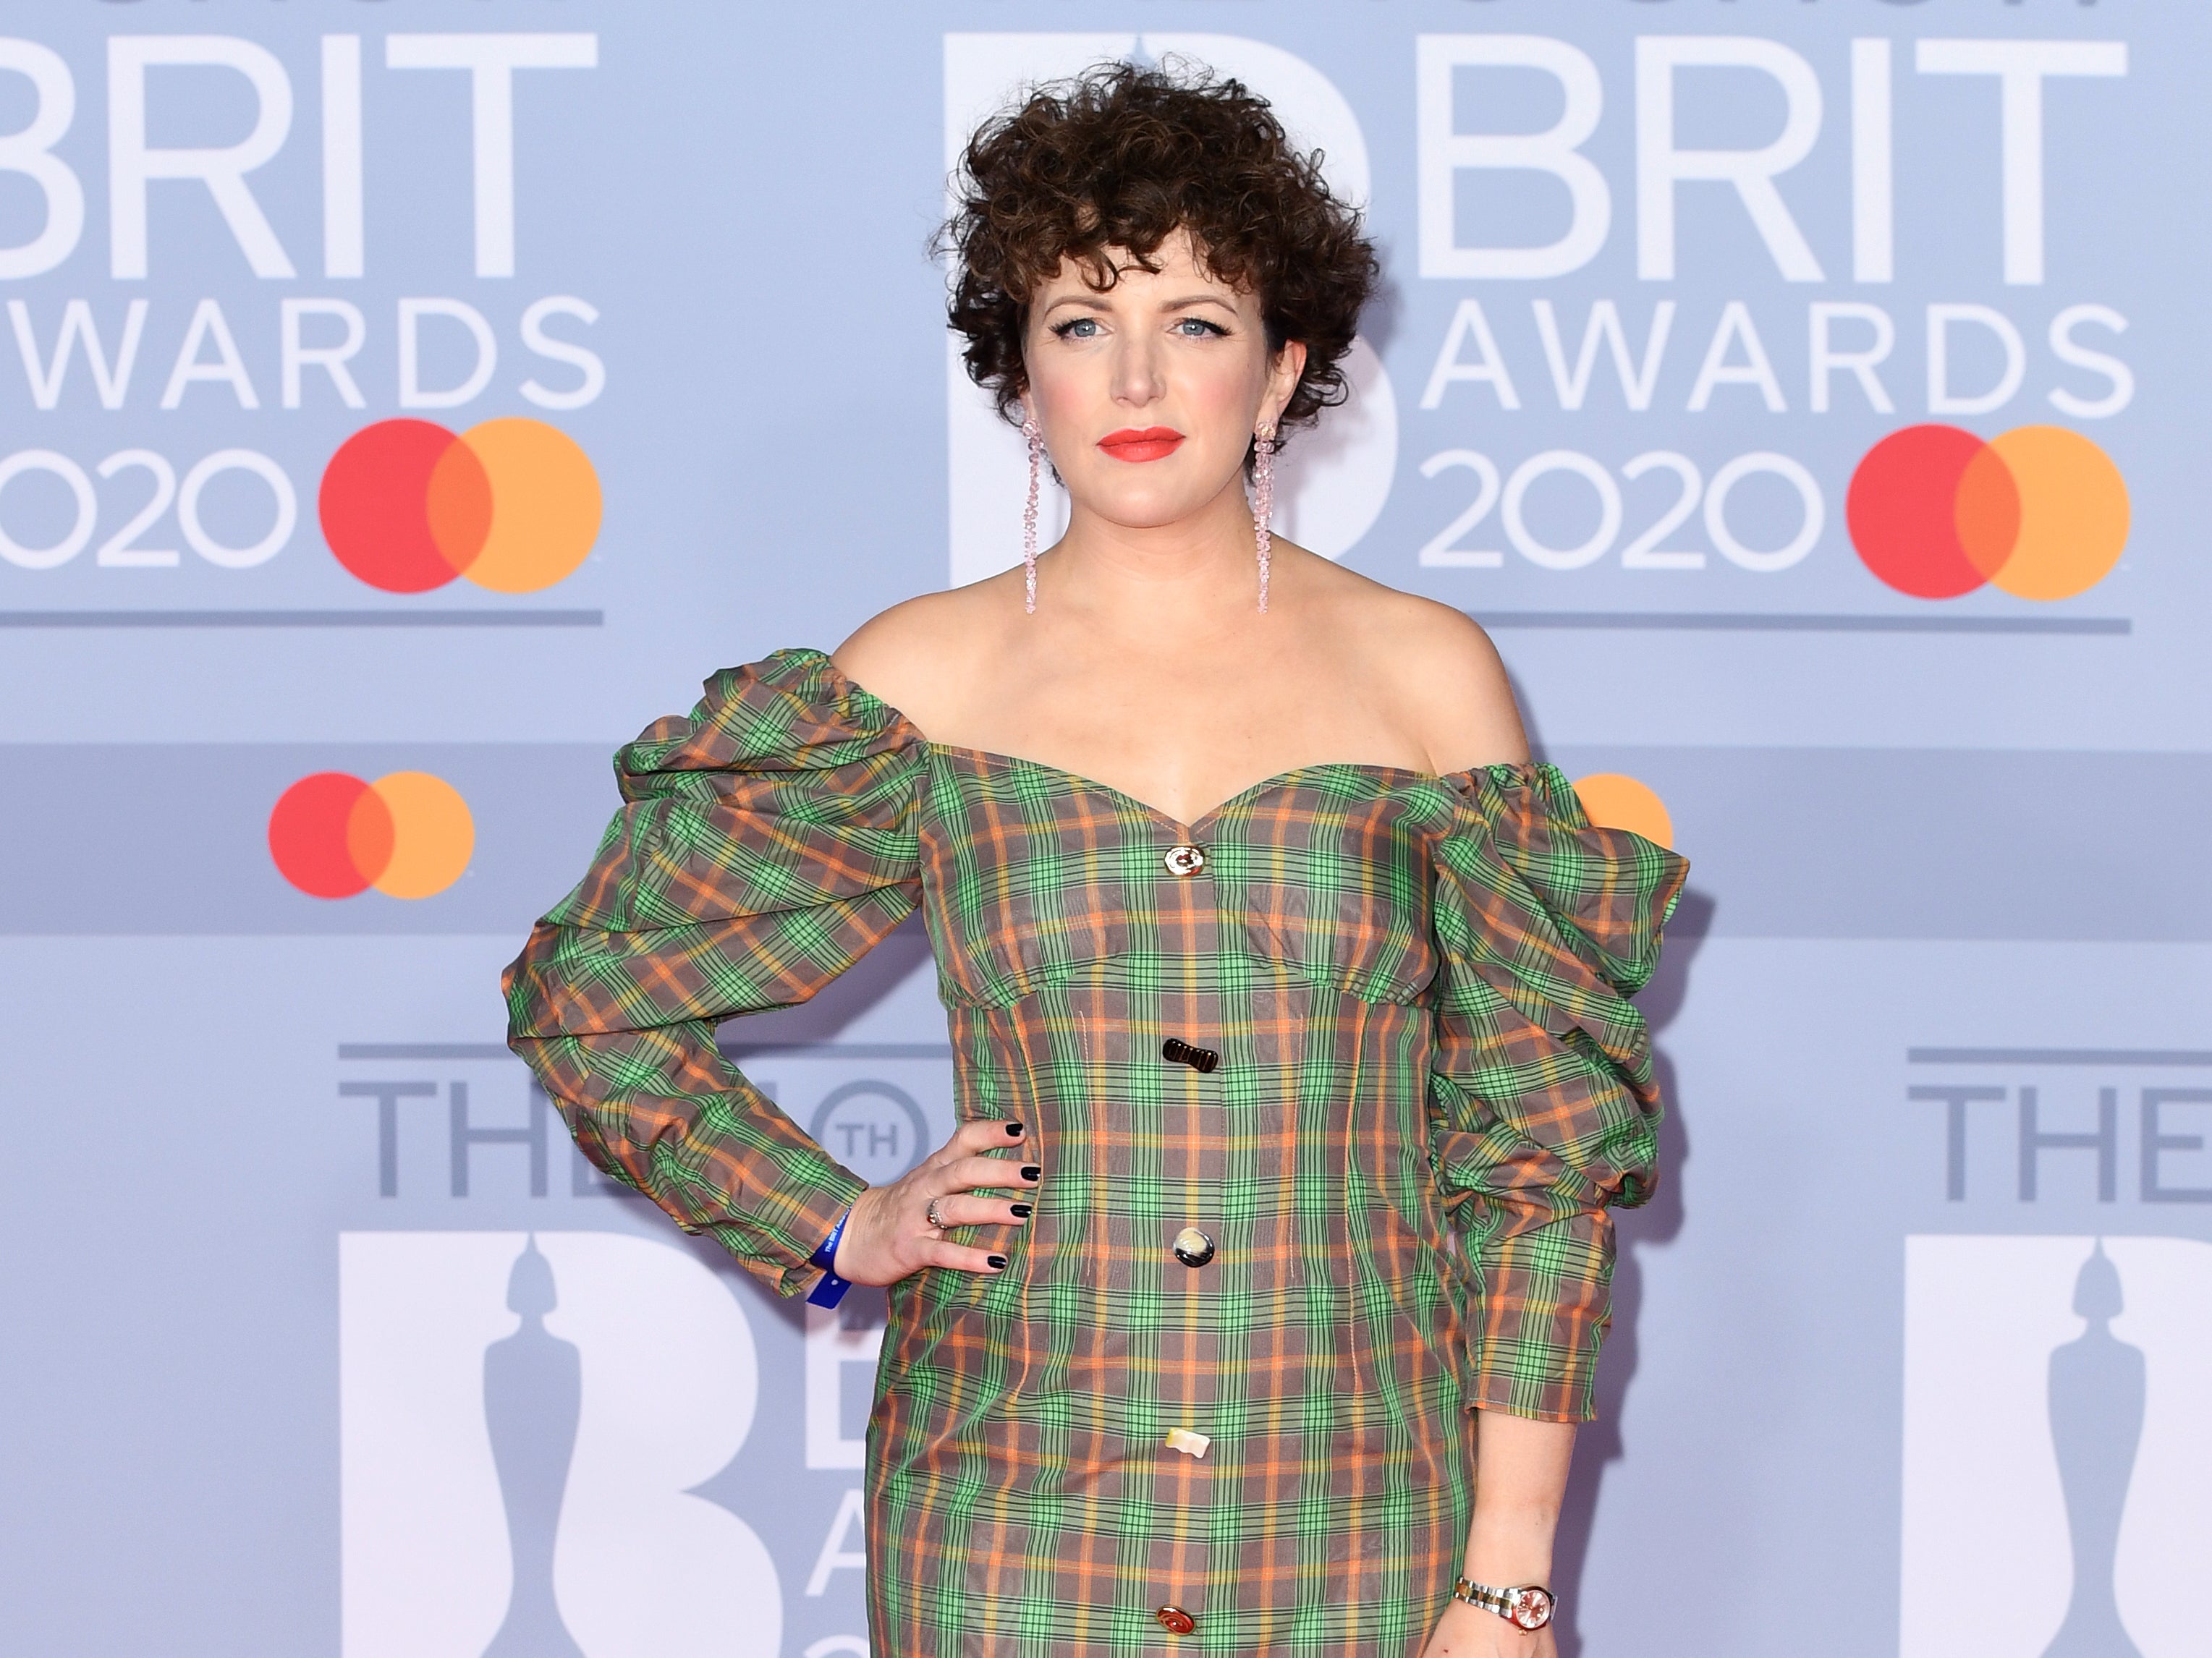 Annie Mac attends The BRIT Awards 2020 at The O2 Arena in London